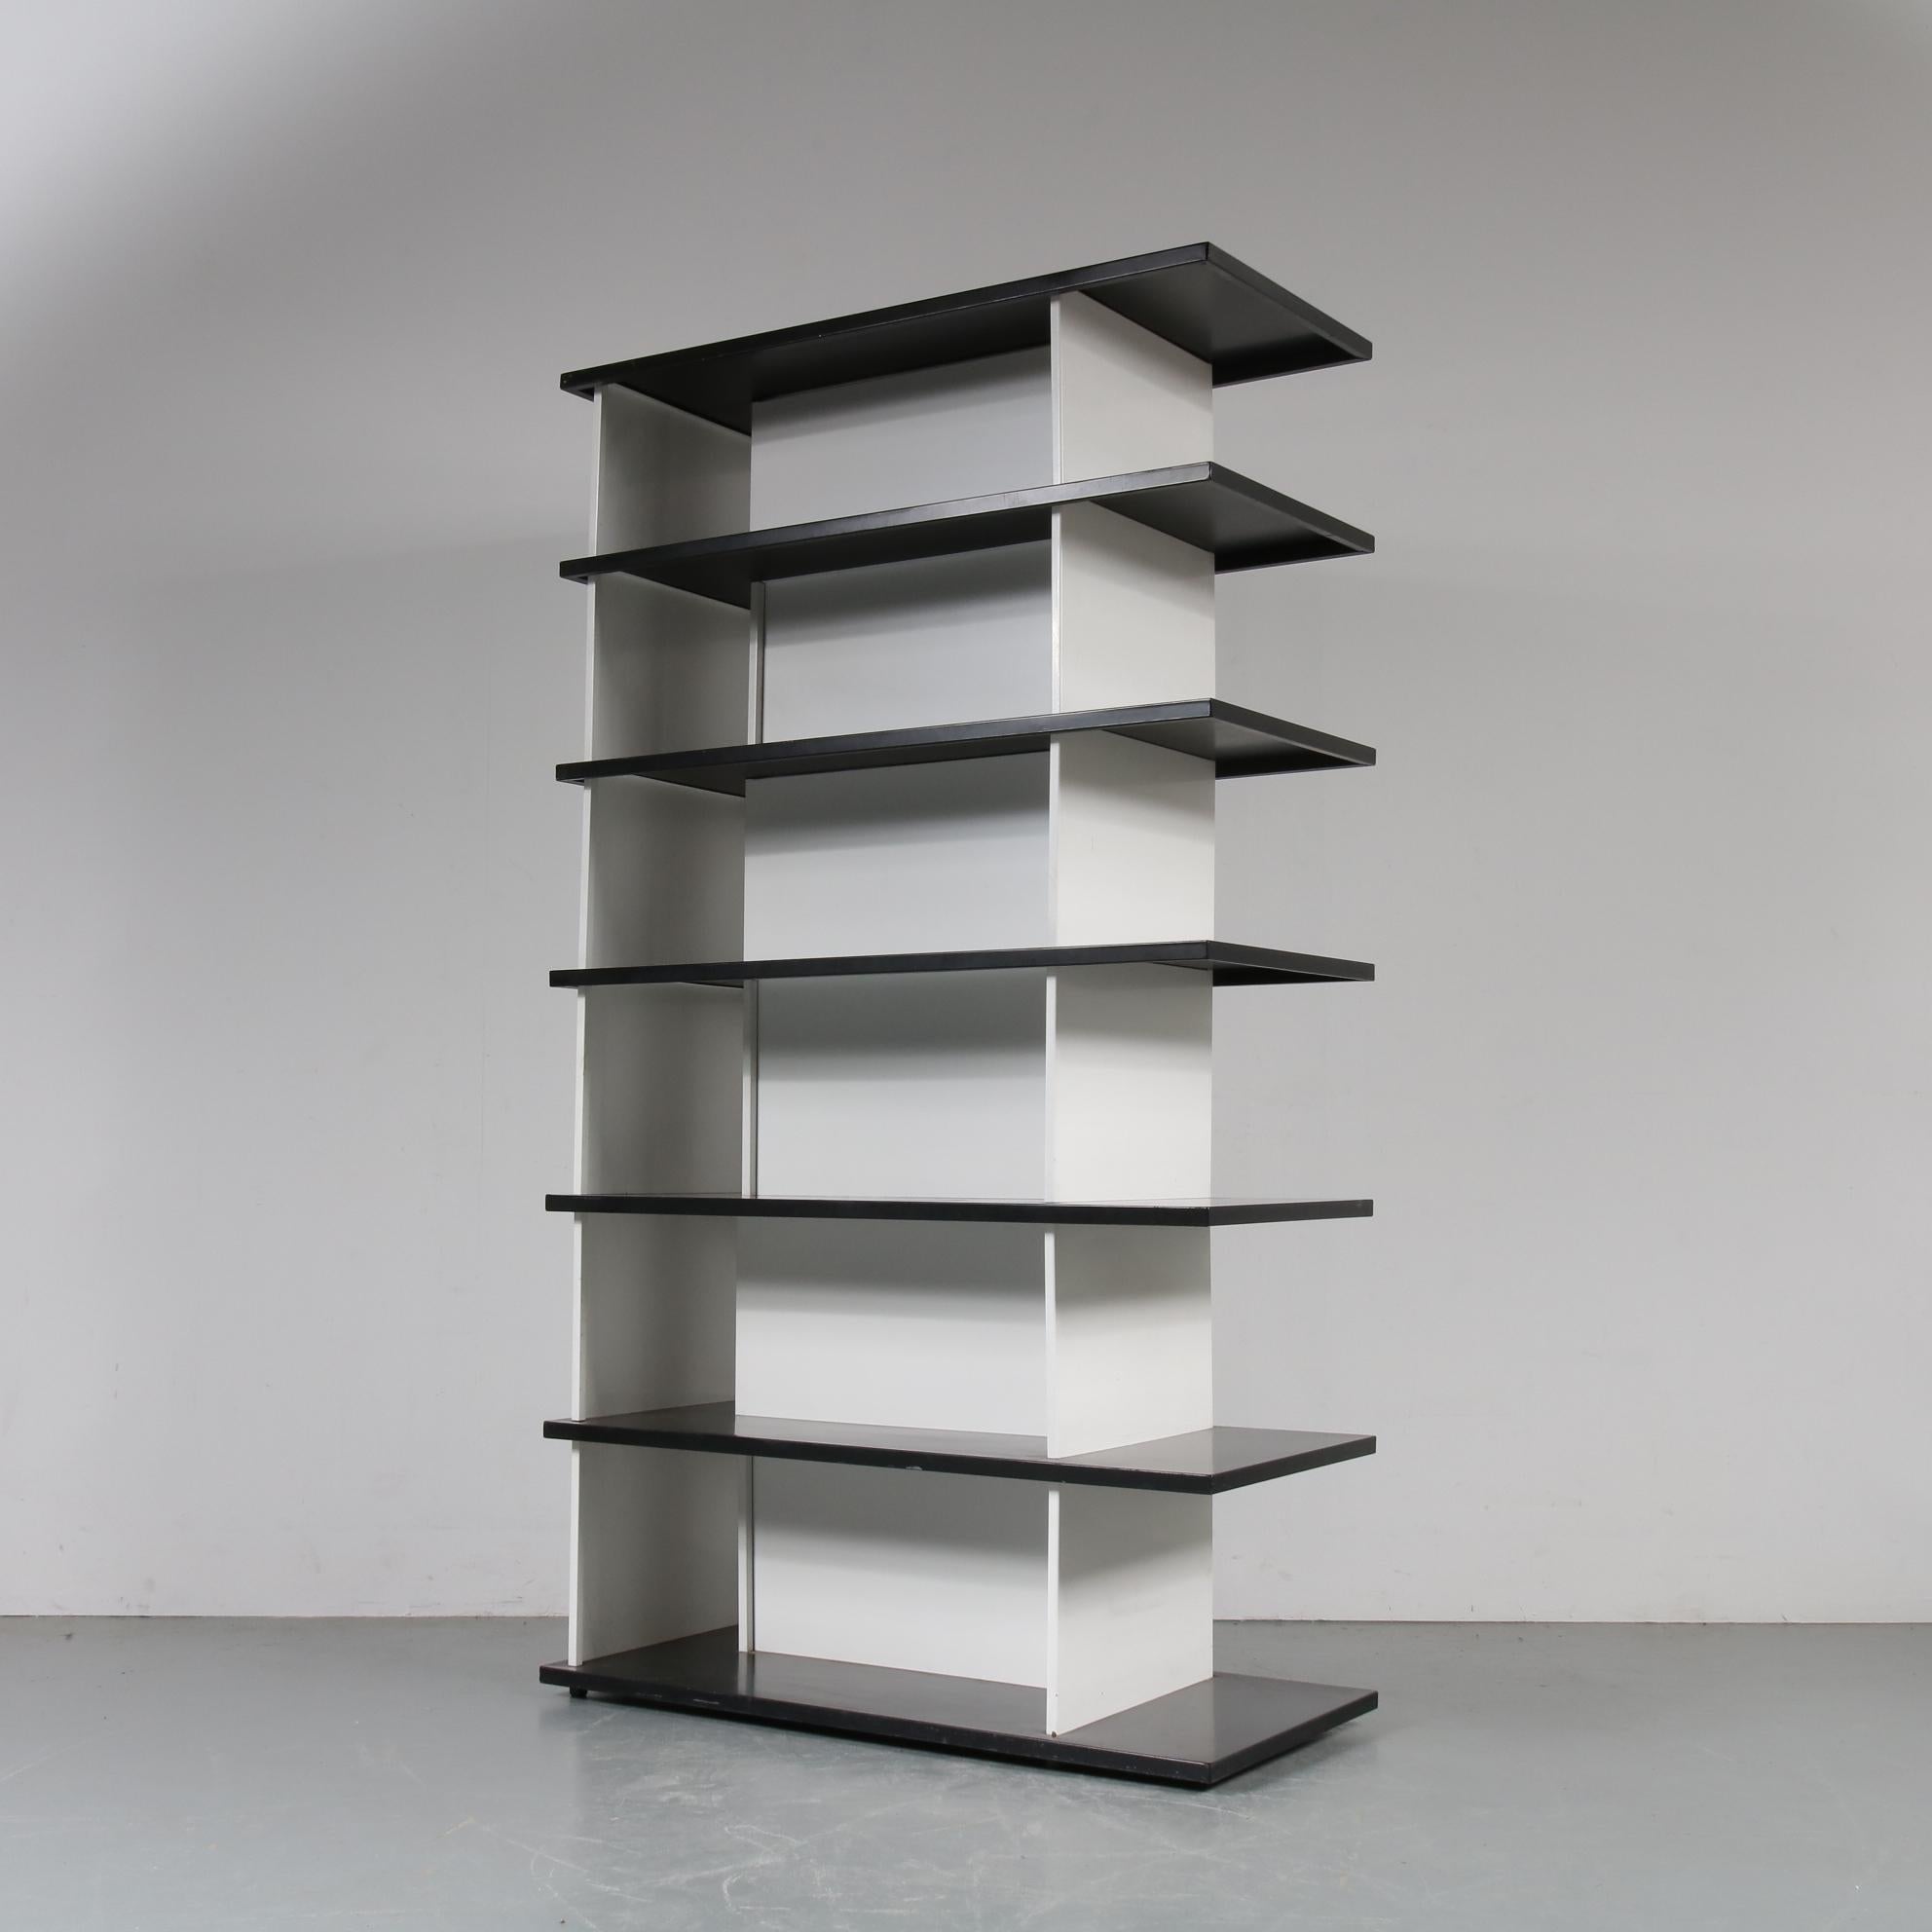 Stunning bookcase by Wim Rietveld, manufactured by De Bijenkorf in the Netherlands, circa 1950.

This unique piece was made by Wim Rietveld in commission for Dutch department store De Bijenkorf. It is entirely made of folded sheet steel, giving it